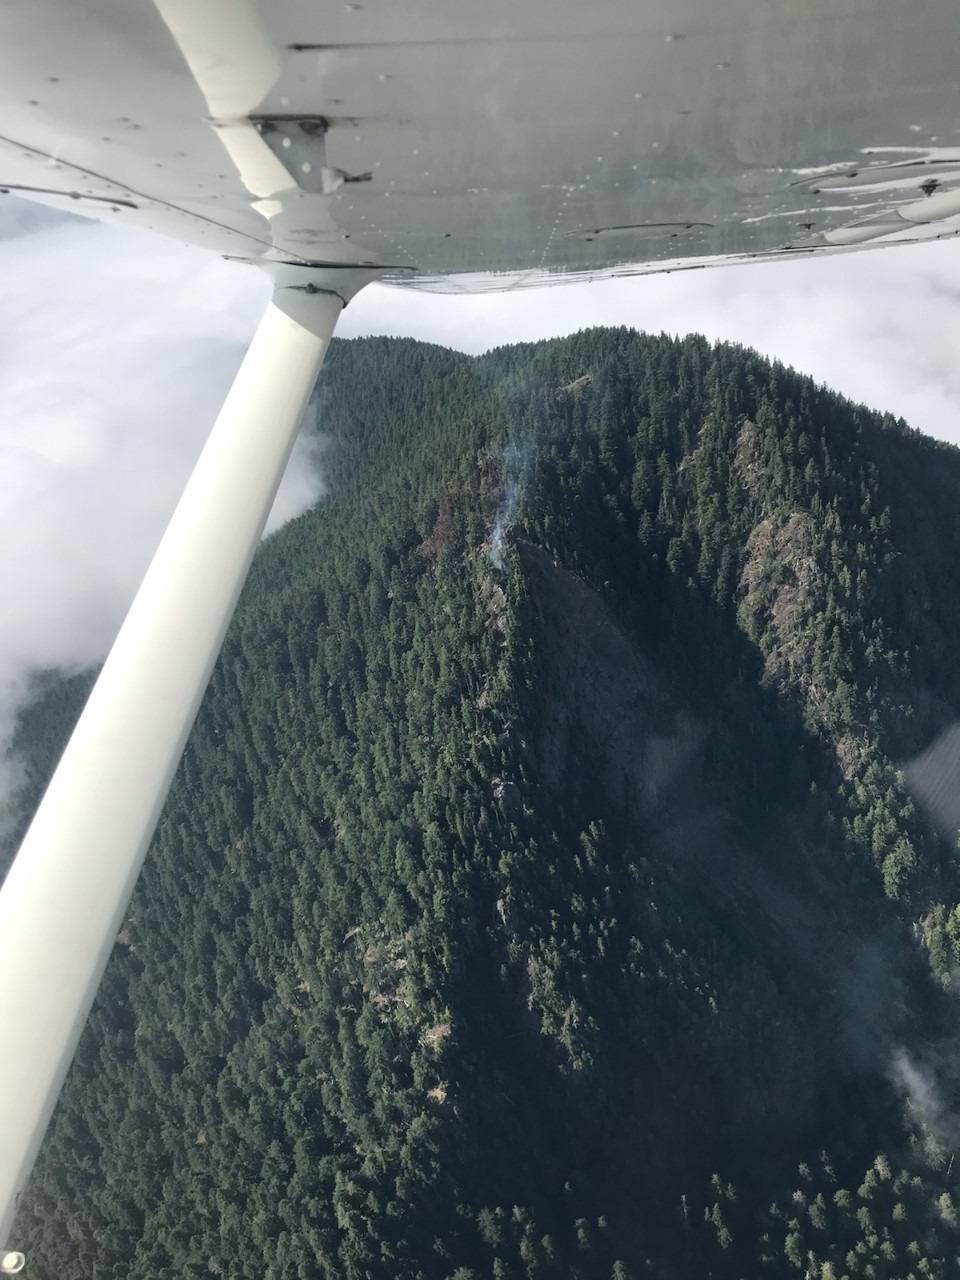 A reconnaissance flight observes a fire at Mount Lena in Olympic National Forest smoking this weekend. (National Park Service)